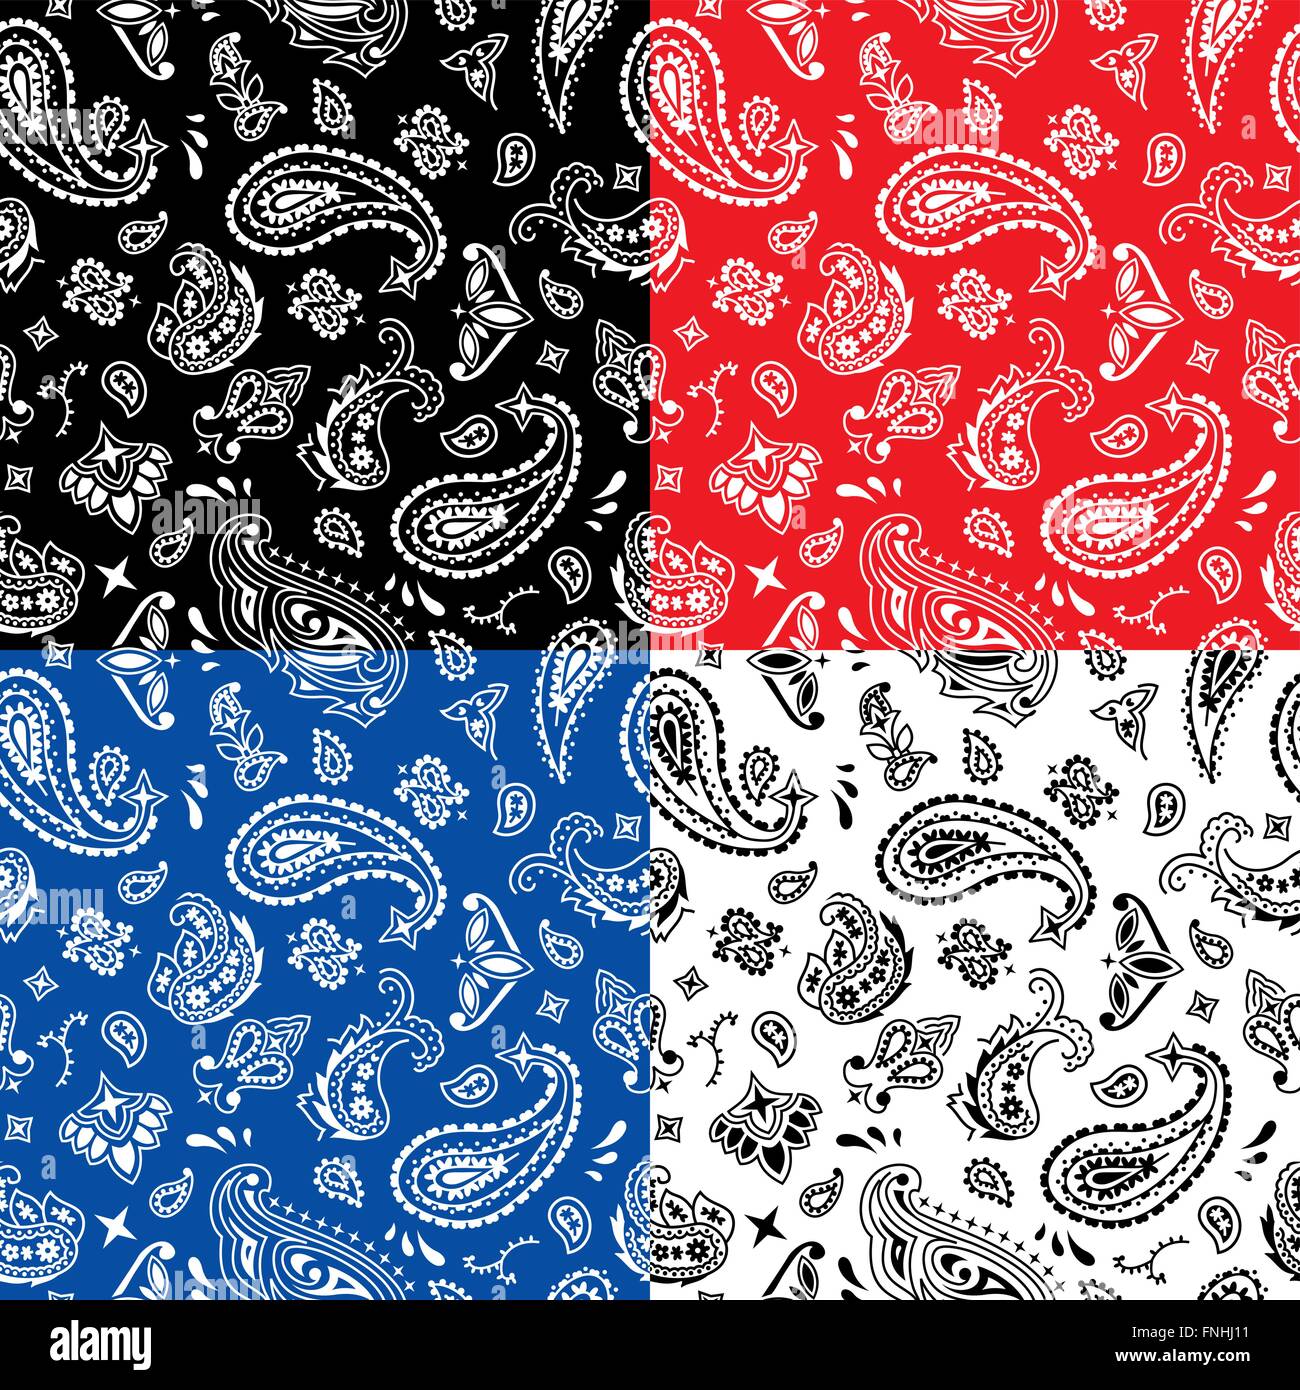 Seamless bandana pattern in 4 color versions. Stock Vector